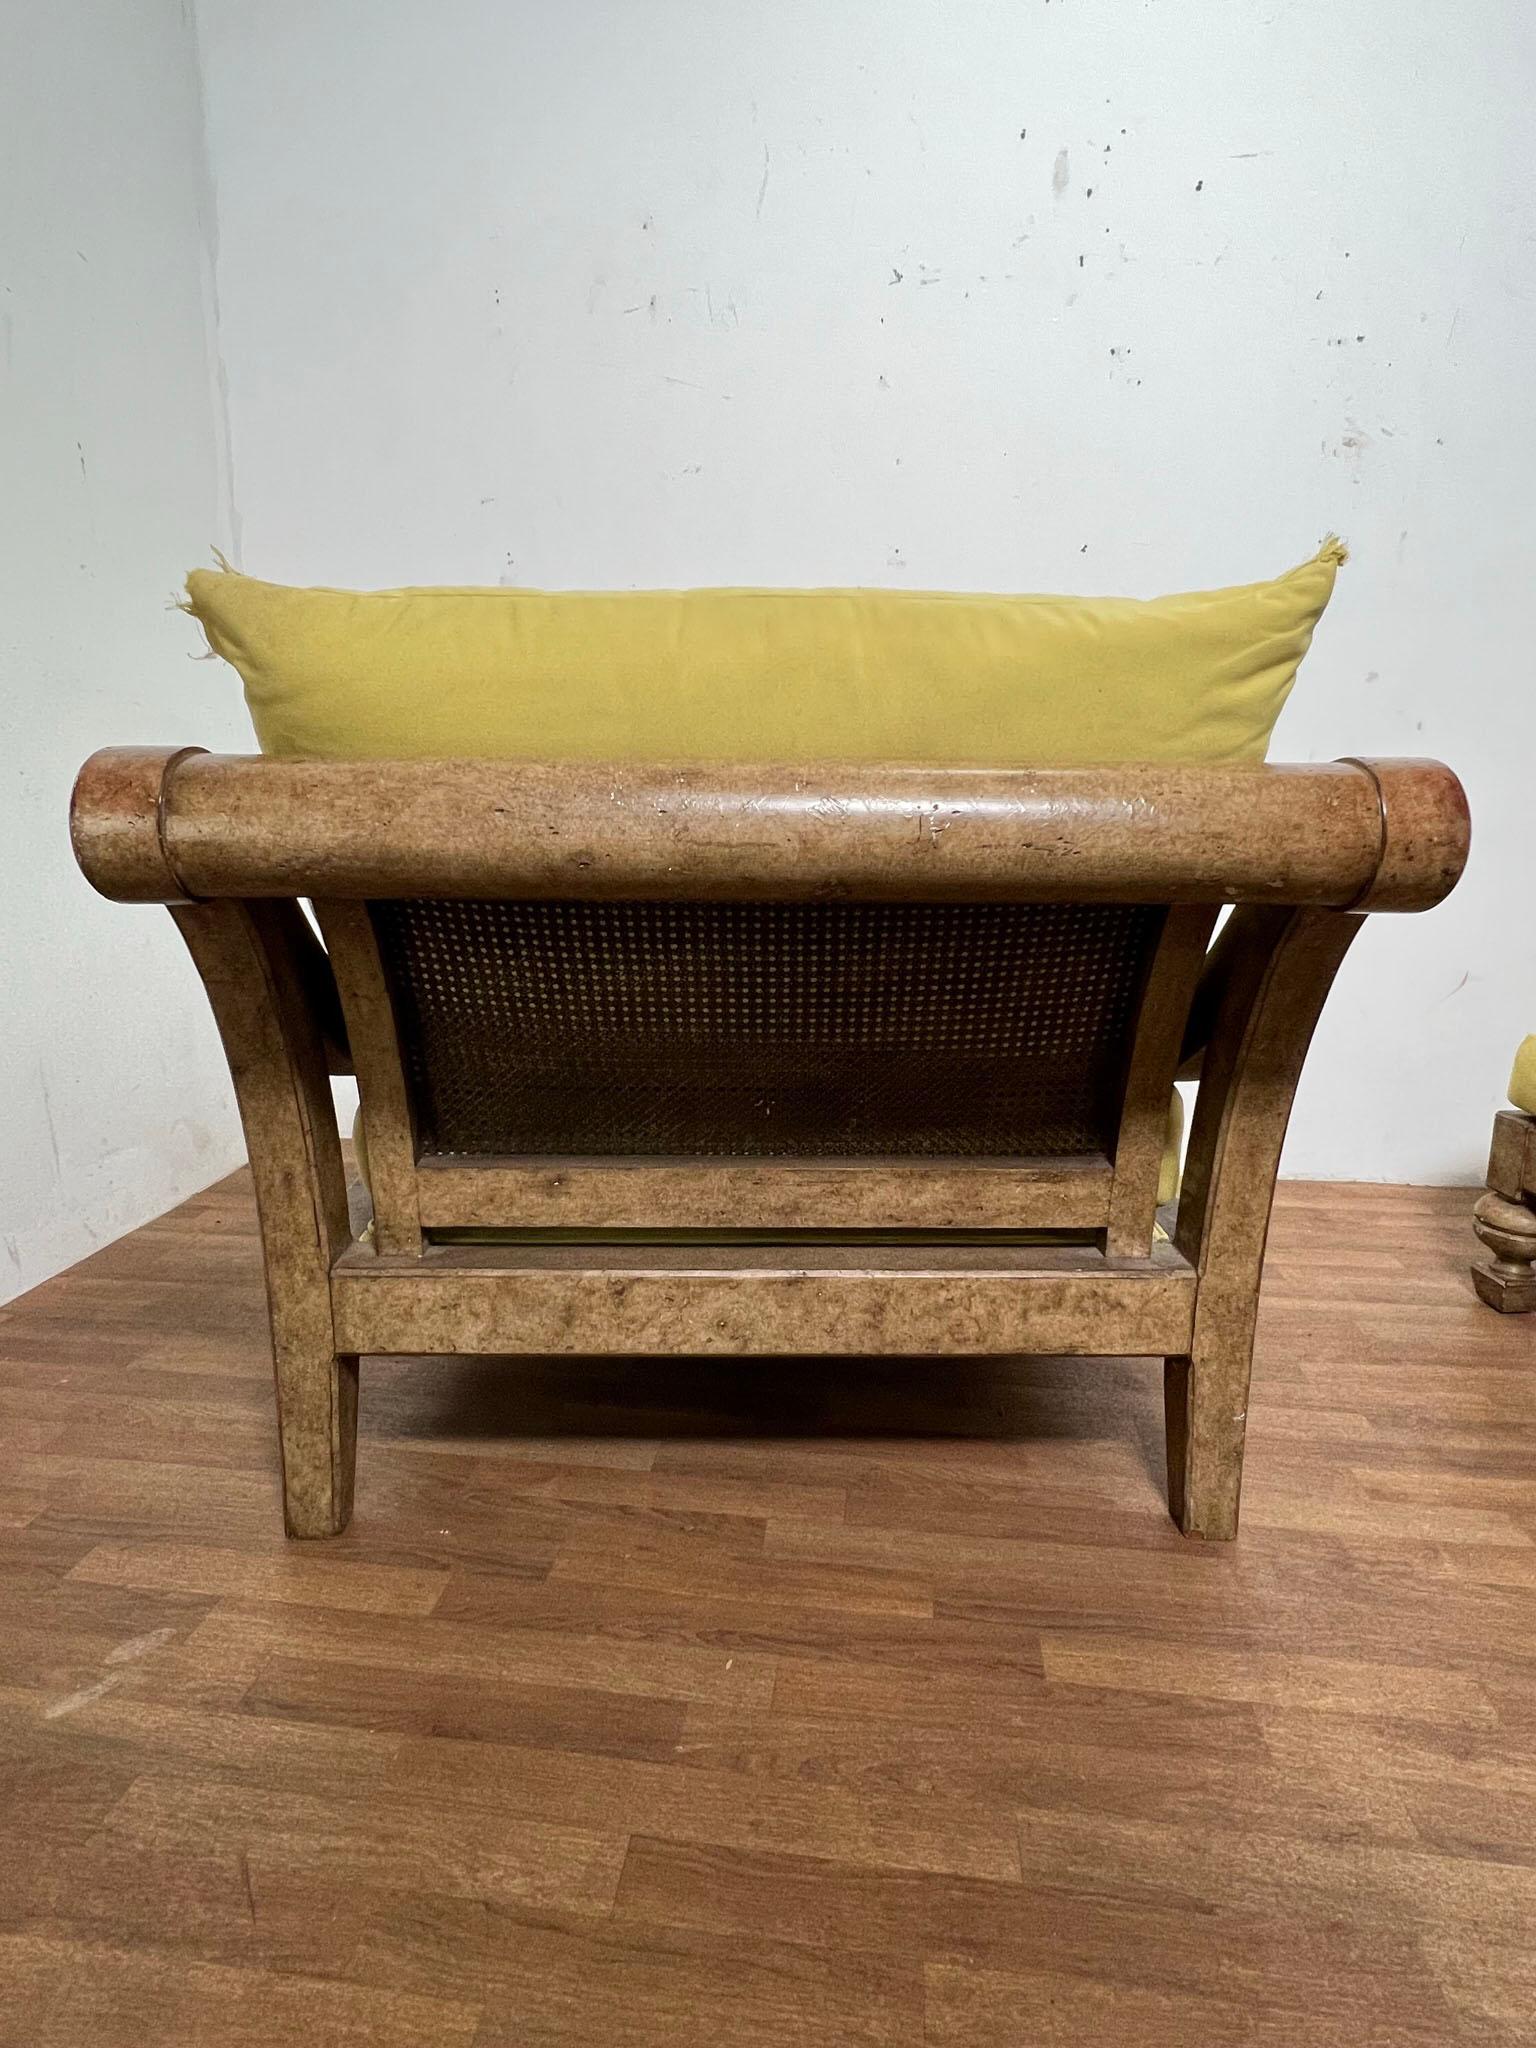 Marge Carson Oversized Burl Wood and Cane Lounge With Ottoman Circa 1980s In Good Condition For Sale In Peabody, MA